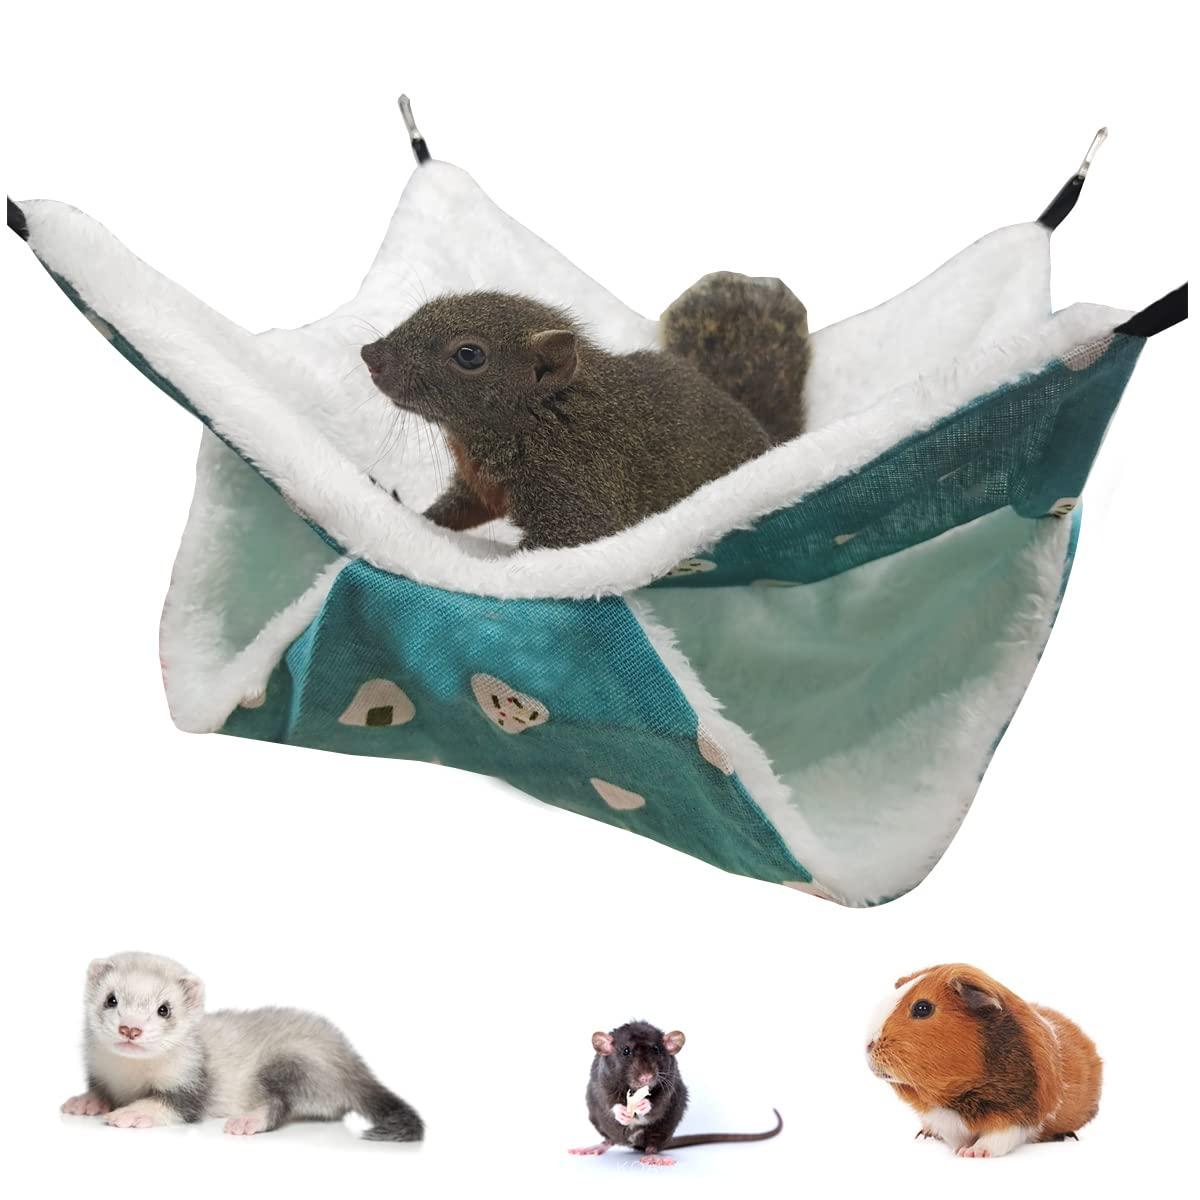 LEFTSTARER Pet Small Animal Hanging Hammock Ferret Bunkbed Hammock Cage Toy for Hamster Rat Sugar Glider Parrot Guinea Pig Hideout Play Sleep (Sweet Candy)